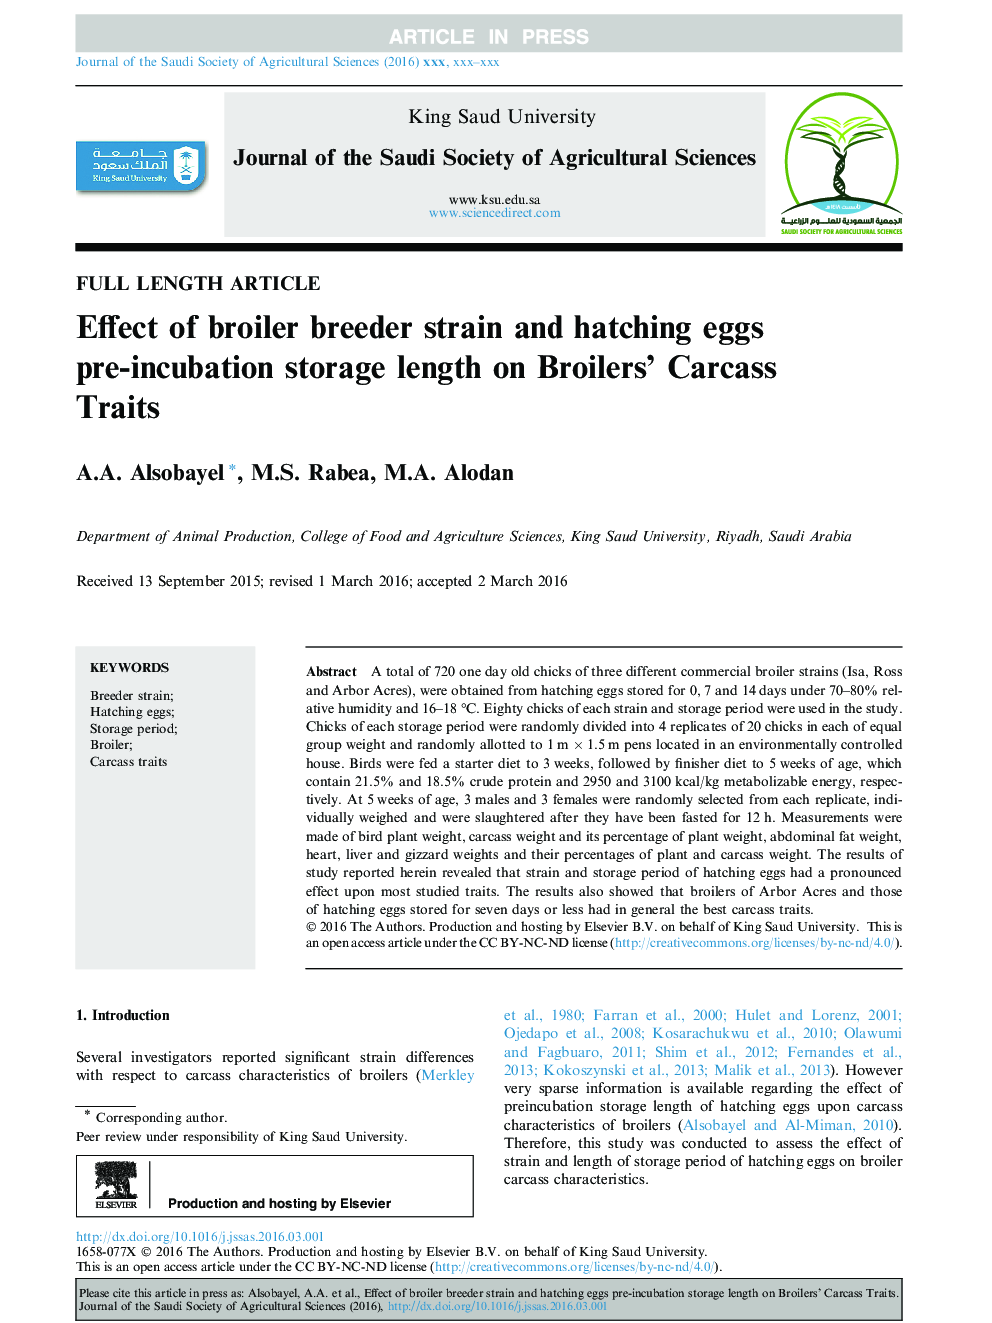 Effect of broiler breeder strain and hatching eggs pre-incubation storage length on Broilers' Carcass Traits